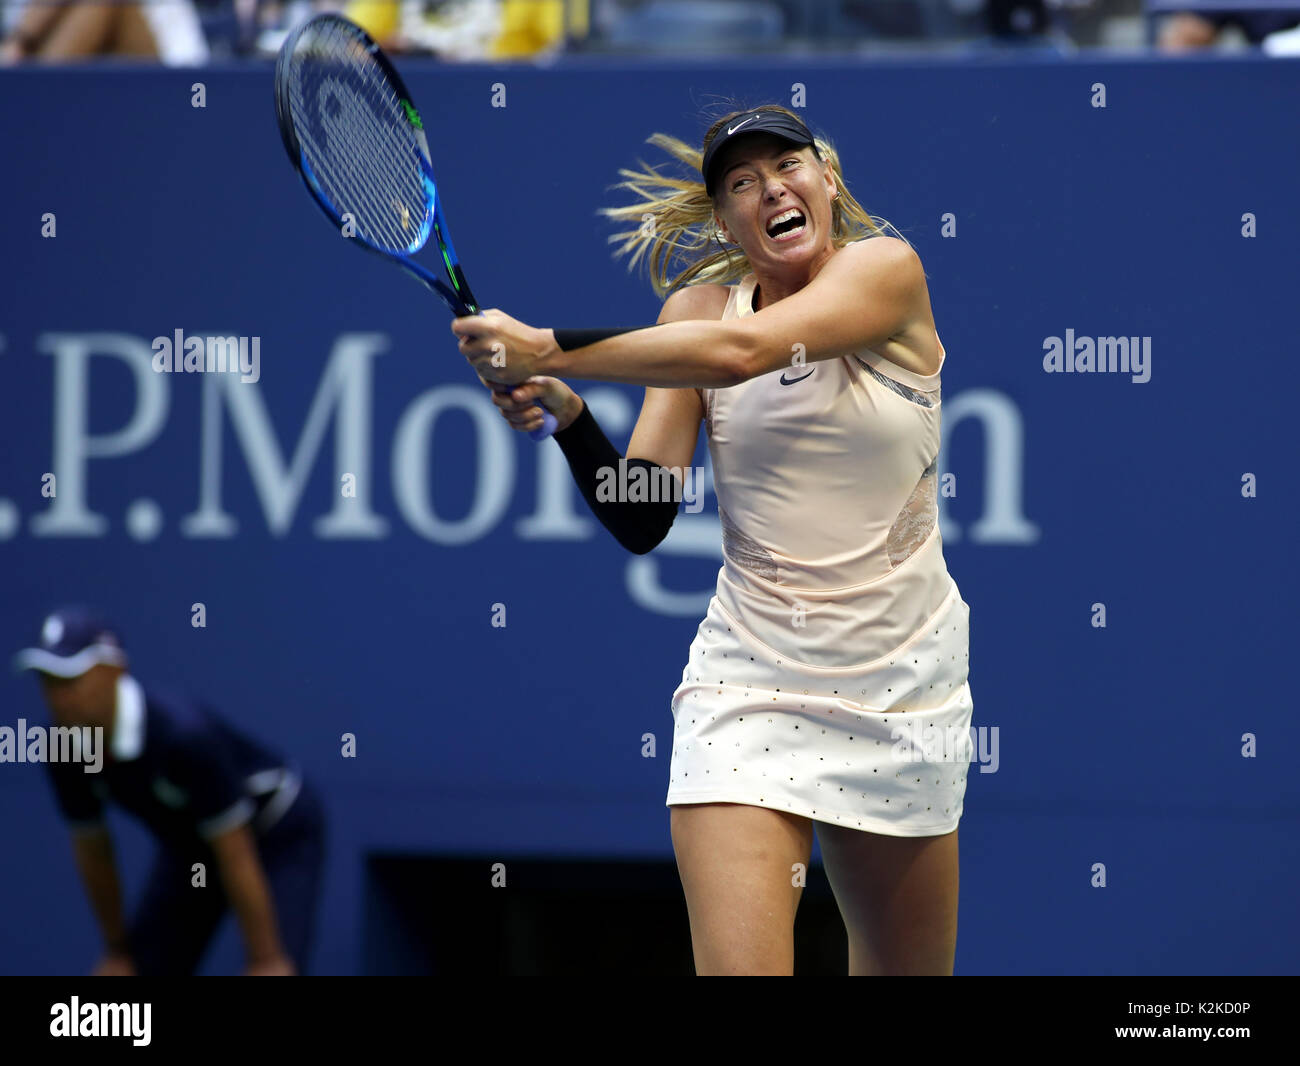 New York, United States. 30th Aug, 2017. US Open Tennis: New York, 30 August, 2017 - Maria Sharapova during her second round match against Timea Babos of Hungary during their second round match at the US Open in Flushing Meadows, New York. Sharapova won the match in three sets. Credit: Adam Stoltman/Alamy Live News Stock Photo